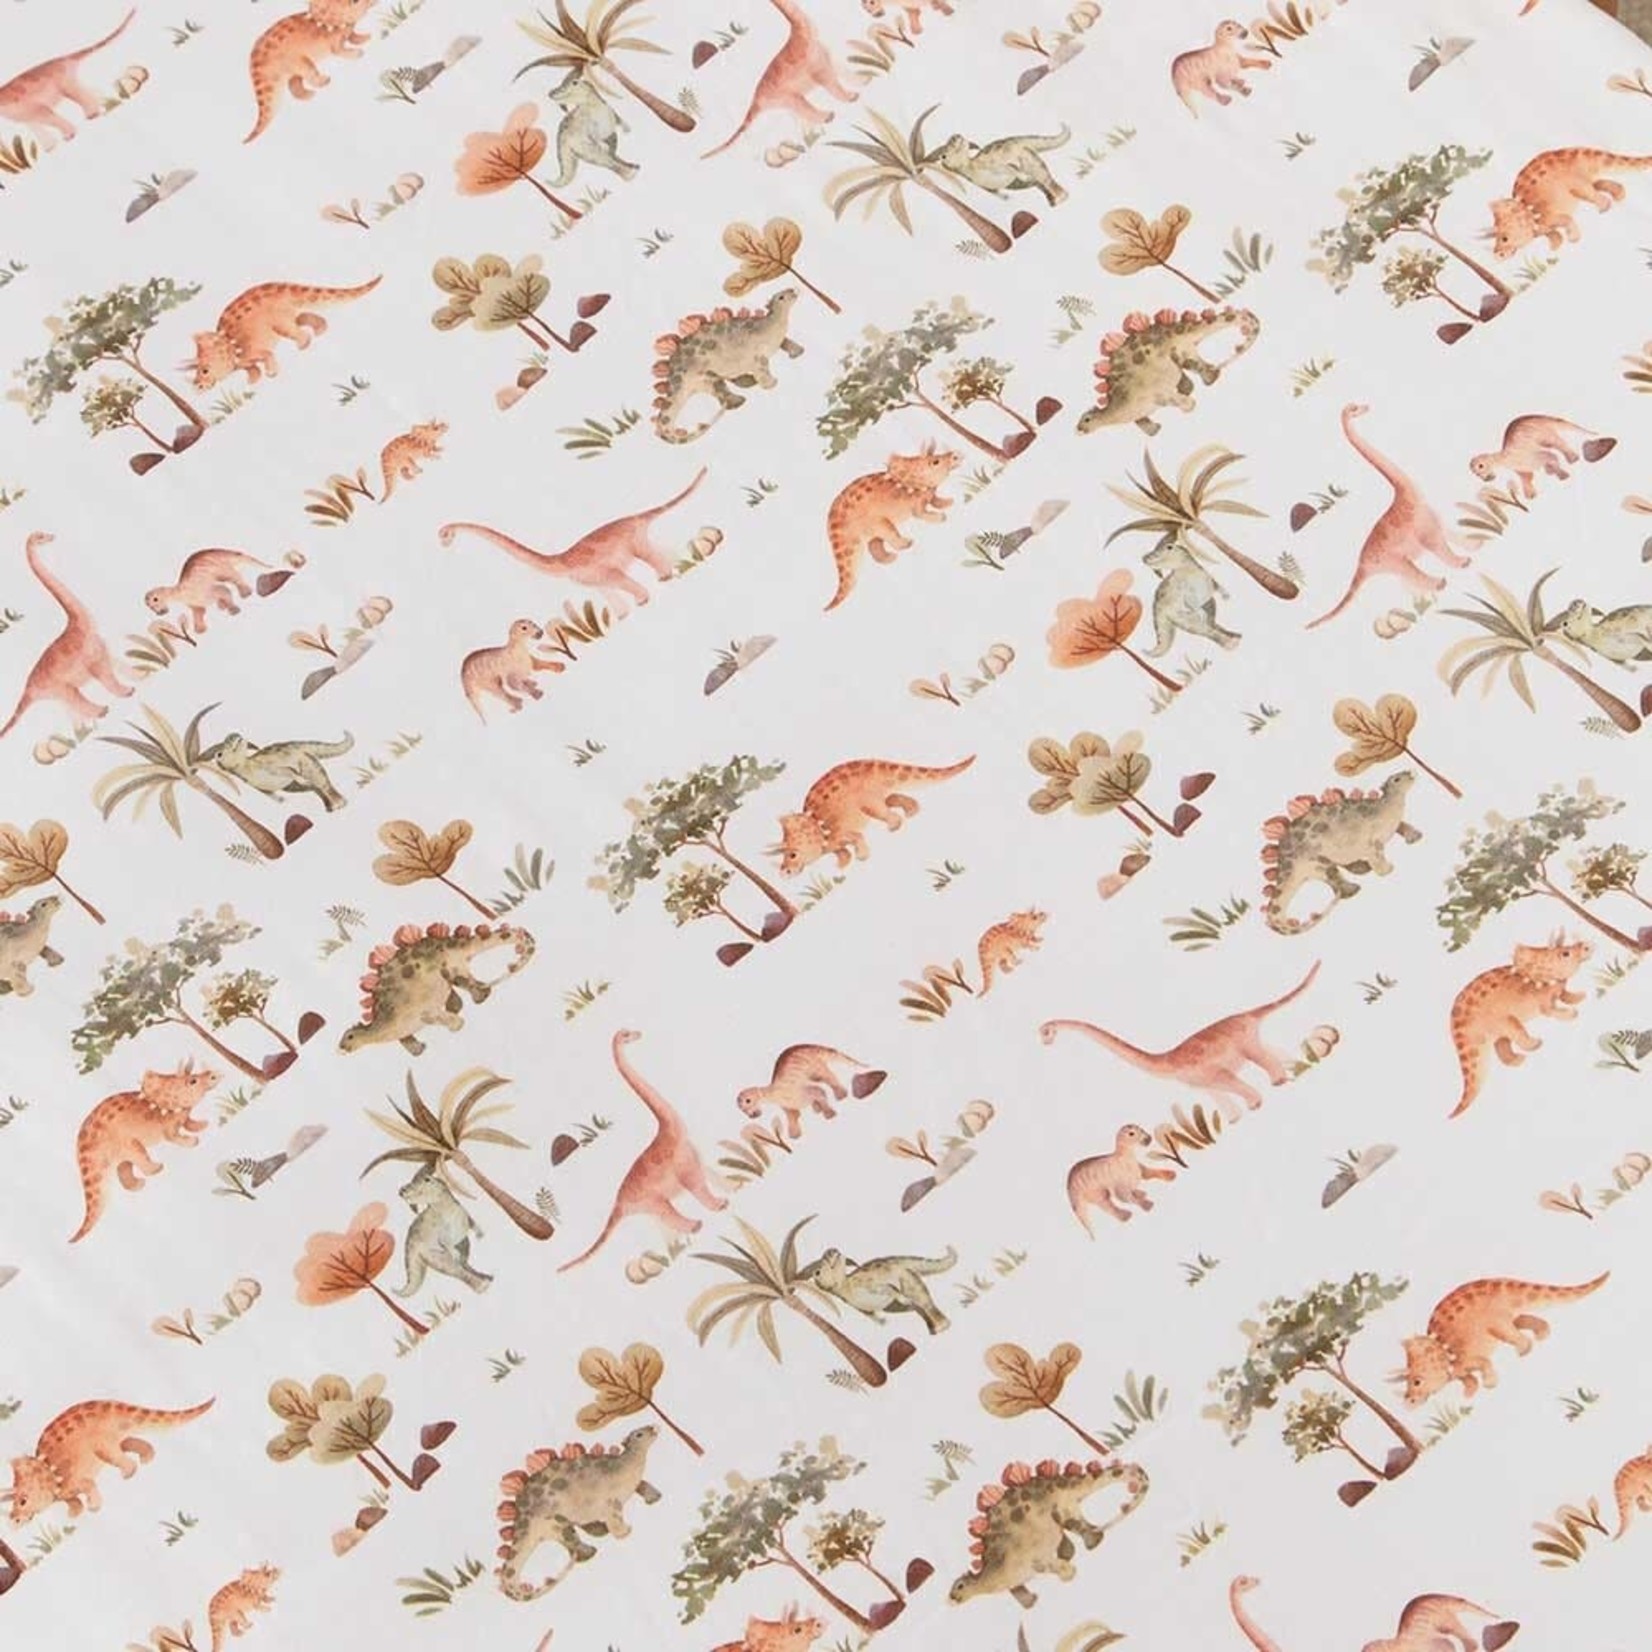 Snuggle Hunny Fitted Cot Sheet Dino